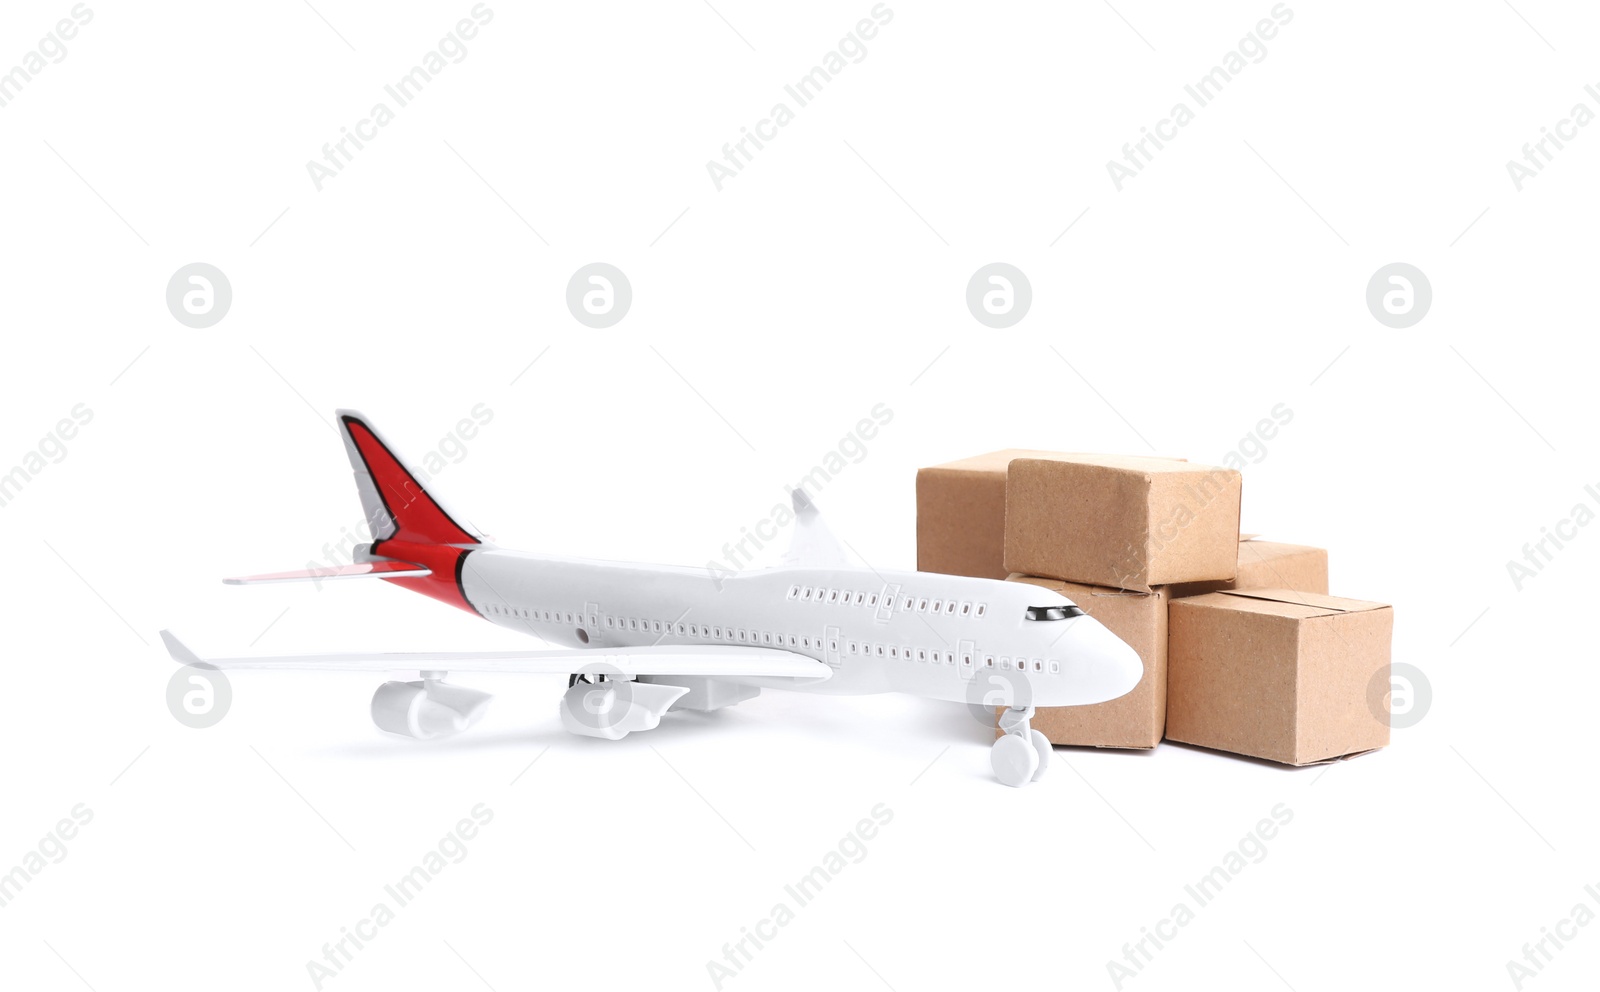 Photo of Airplane model and carton boxes on white background. Courier service